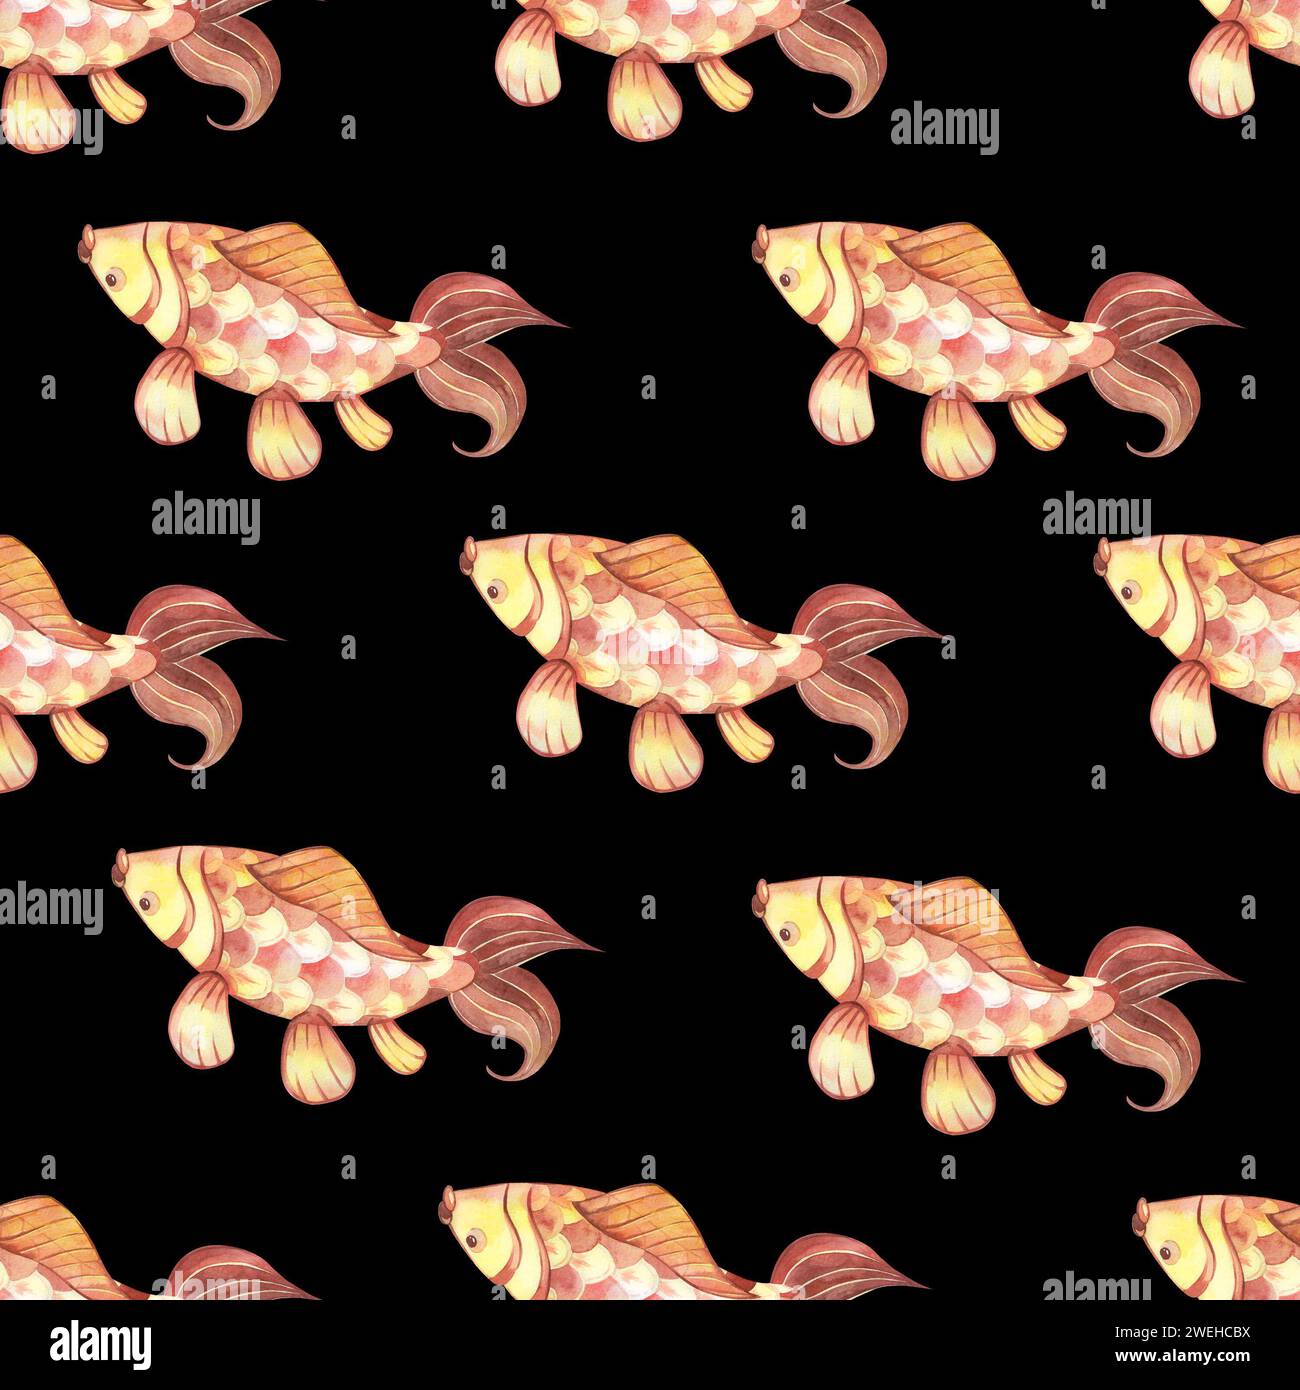 Seamless pattern. Chinese carp are red and yellow in color with large fins on a dark background. All elements are hand-painted with watercolors. Stock Photo